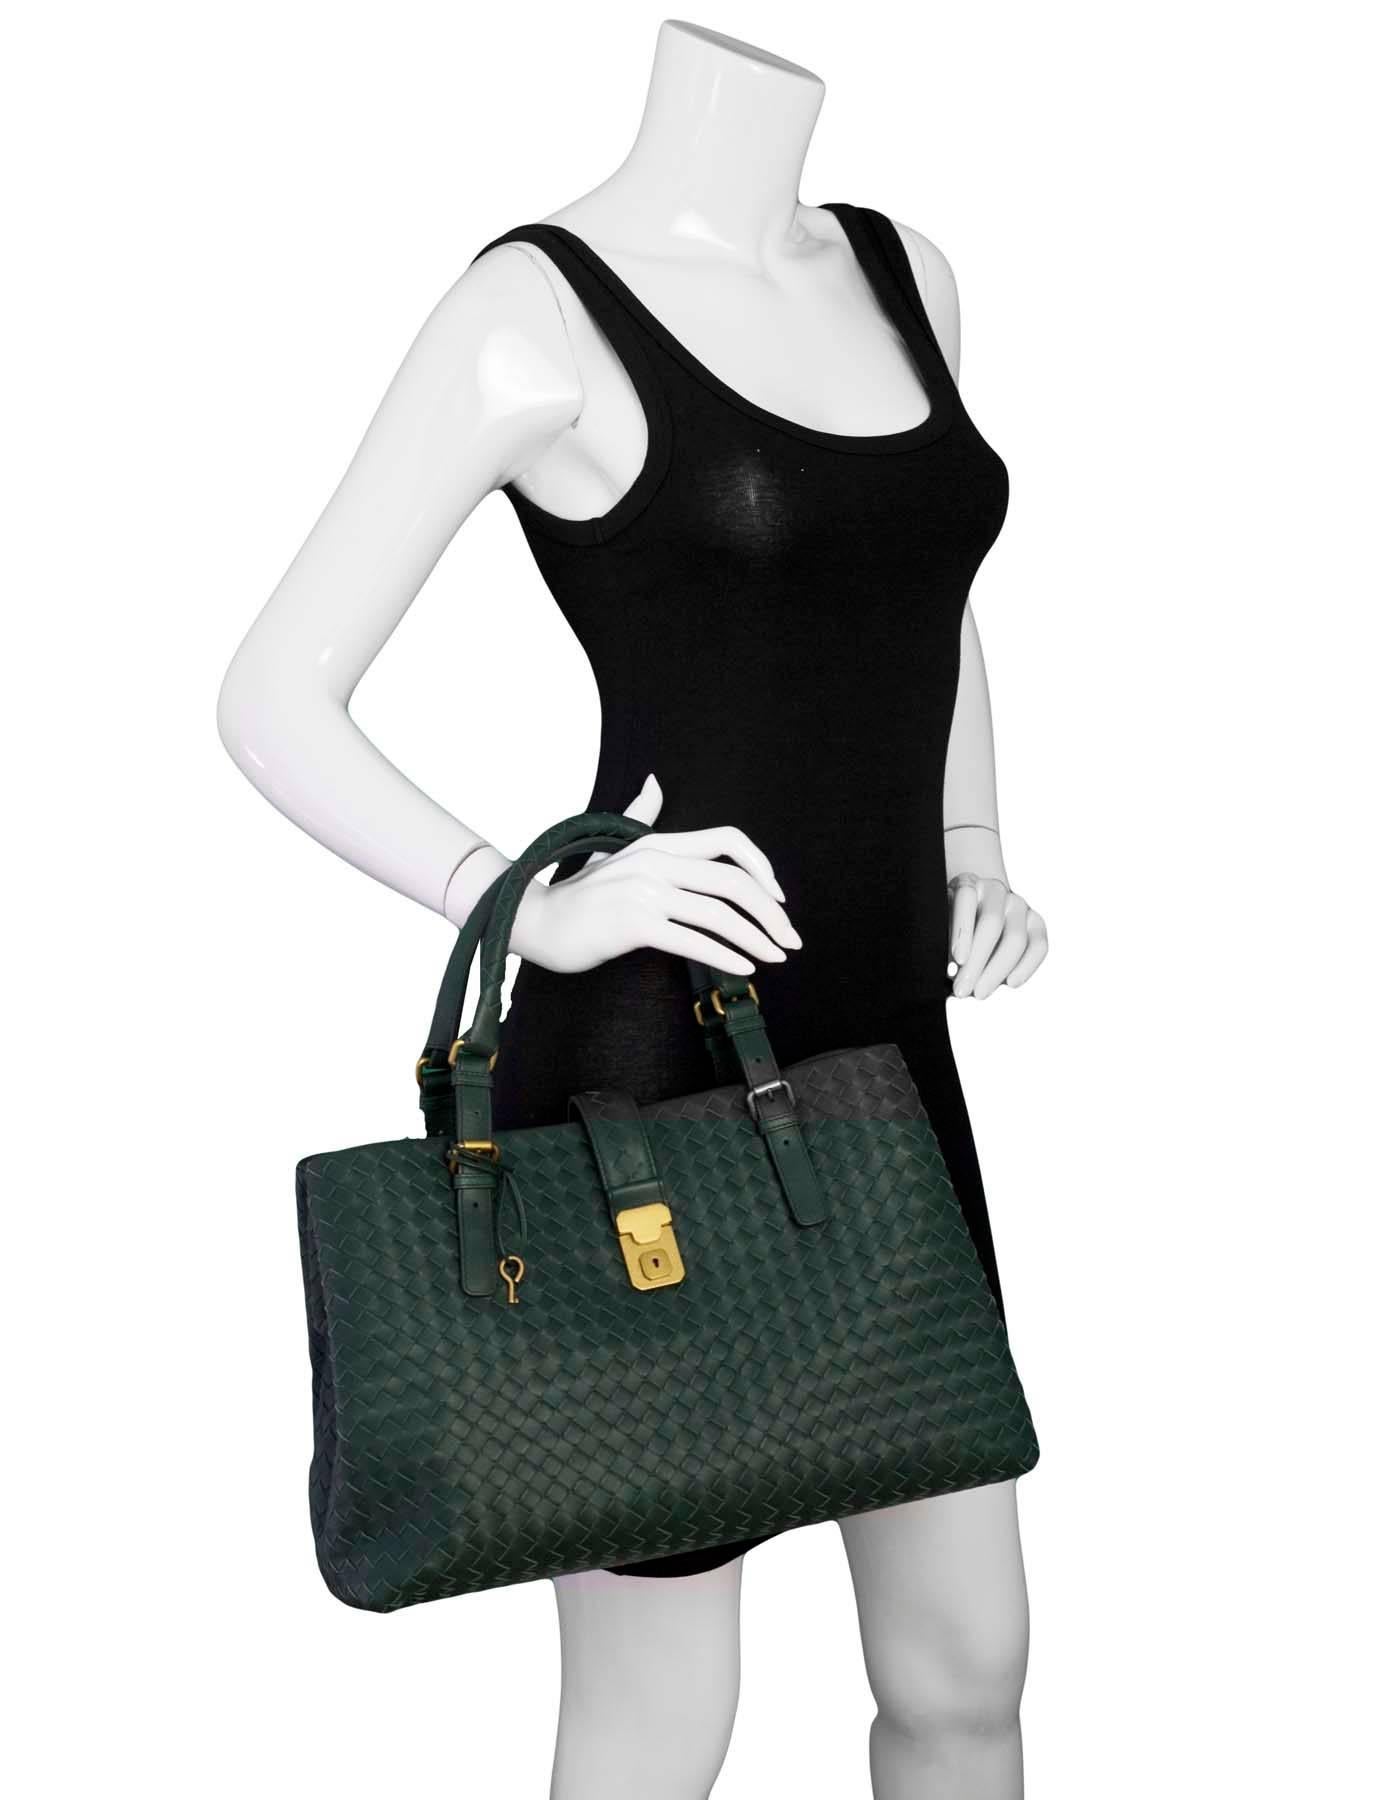 Bottega Veneta Green Intrecciato Roma Tote

Made In: Italy
Color: Green
Hardware: Goldtone
Materials: Leather, metal
Lining: Purple textile
Closure/Opening: Open top with center strap
Exterior Pockets: Three compartments
Interior Pockets: One zip